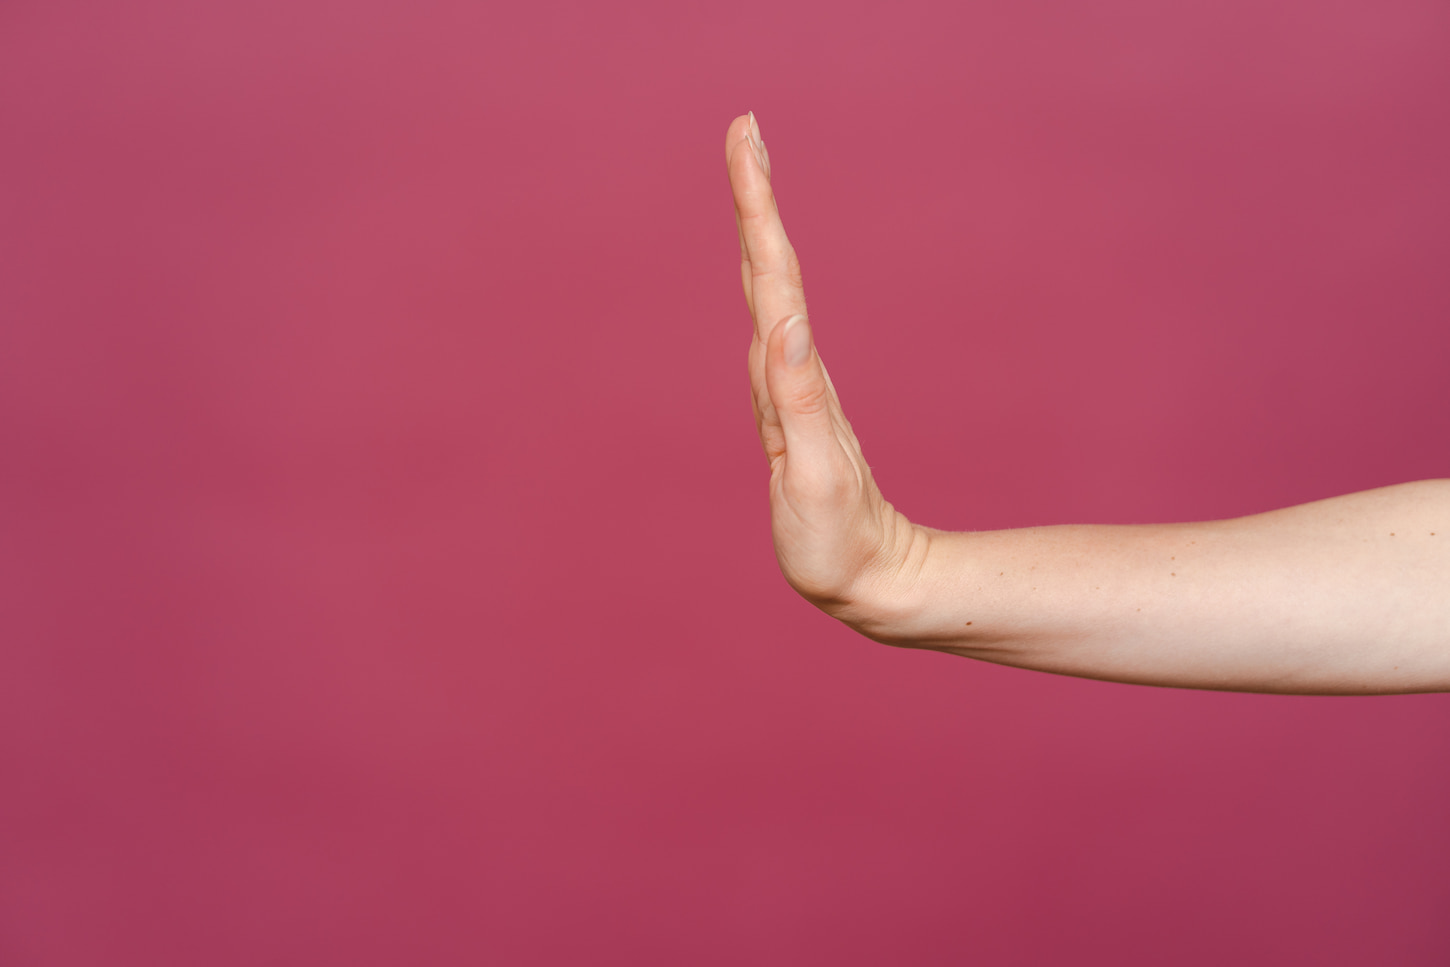 An image of a woman's hand showing stop sign on a pink background.